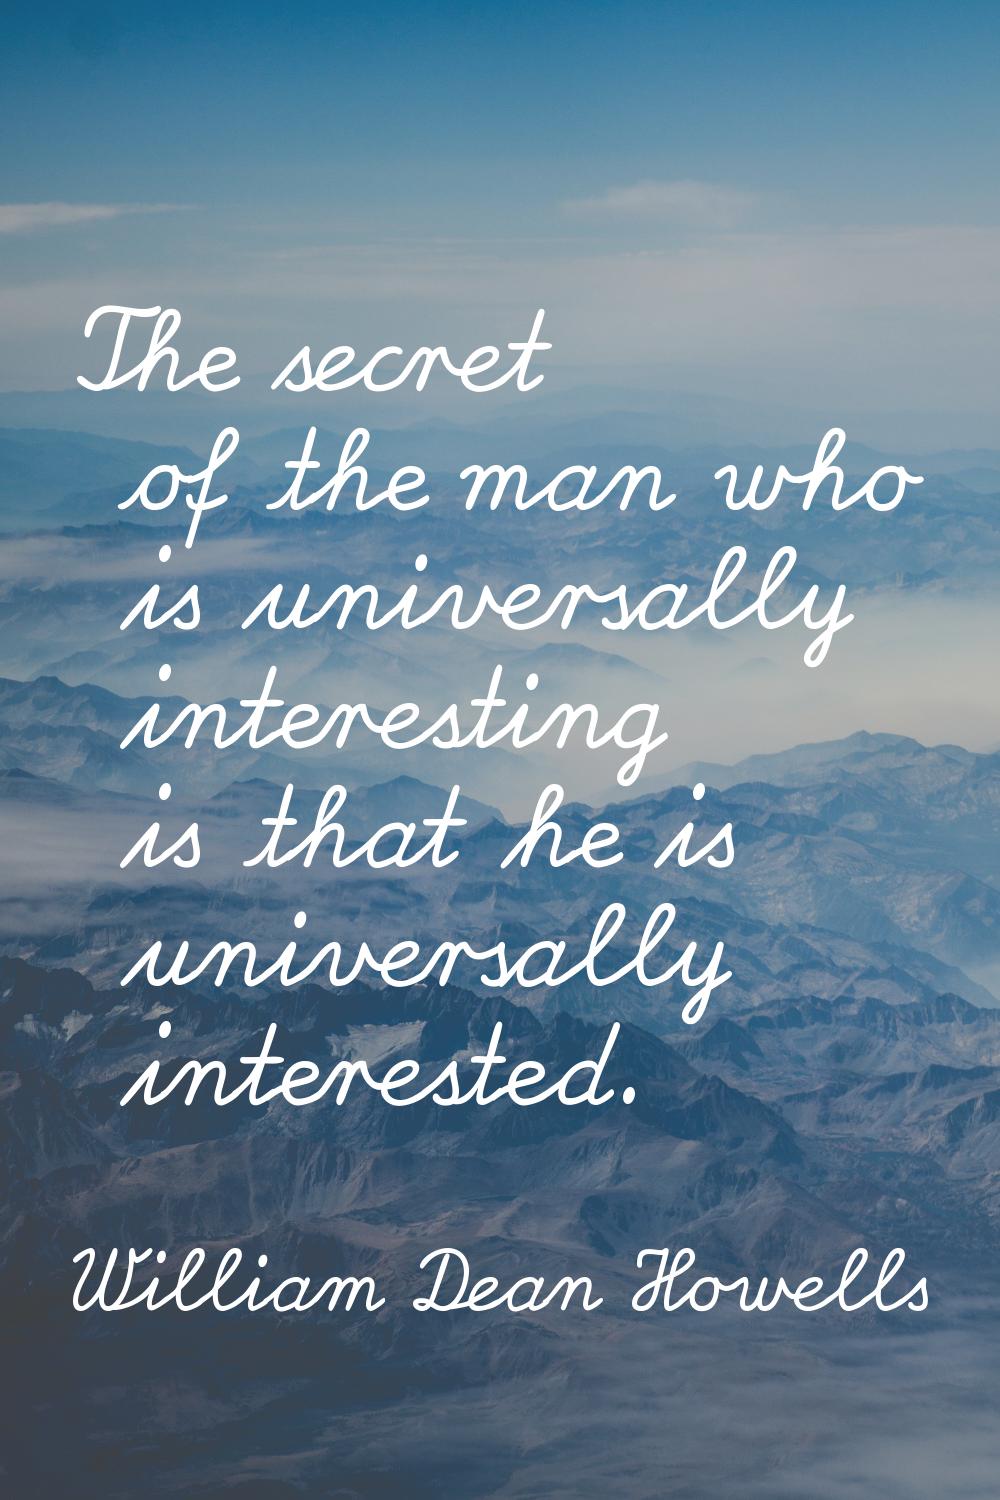 The secret of the man who is universally interesting is that he is universally interested.